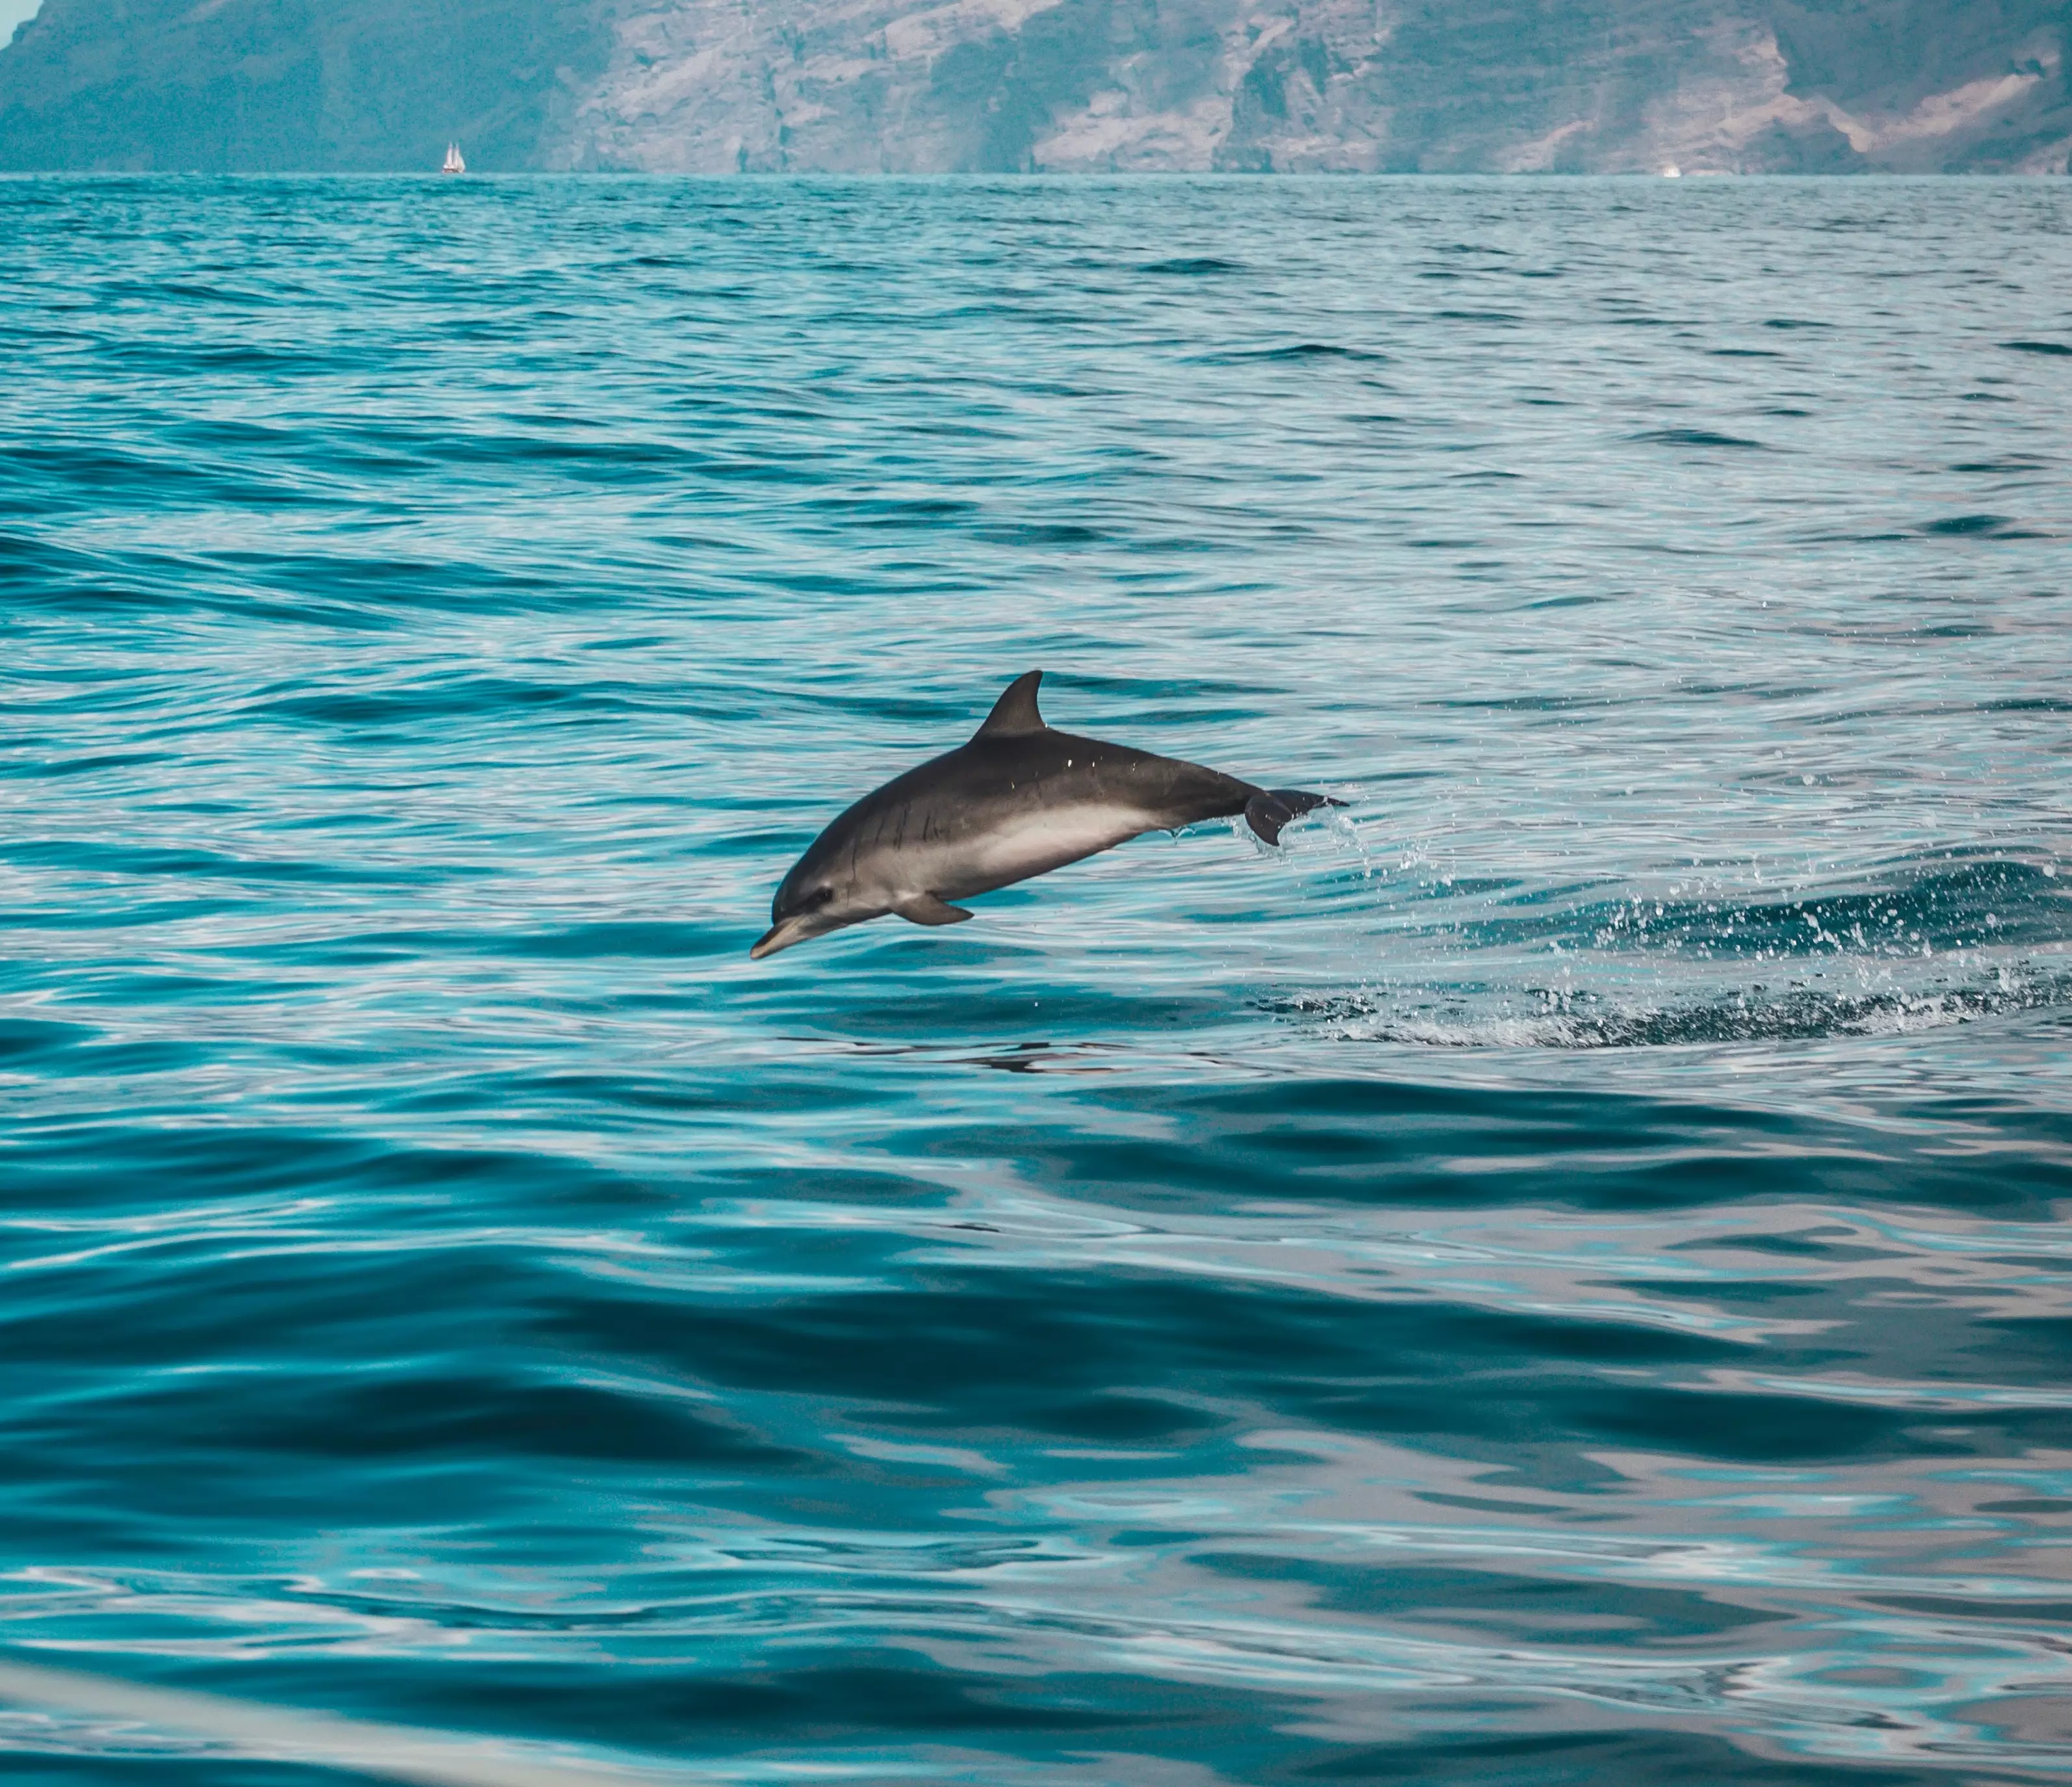 Common dolphin are frequently spotted in the area (